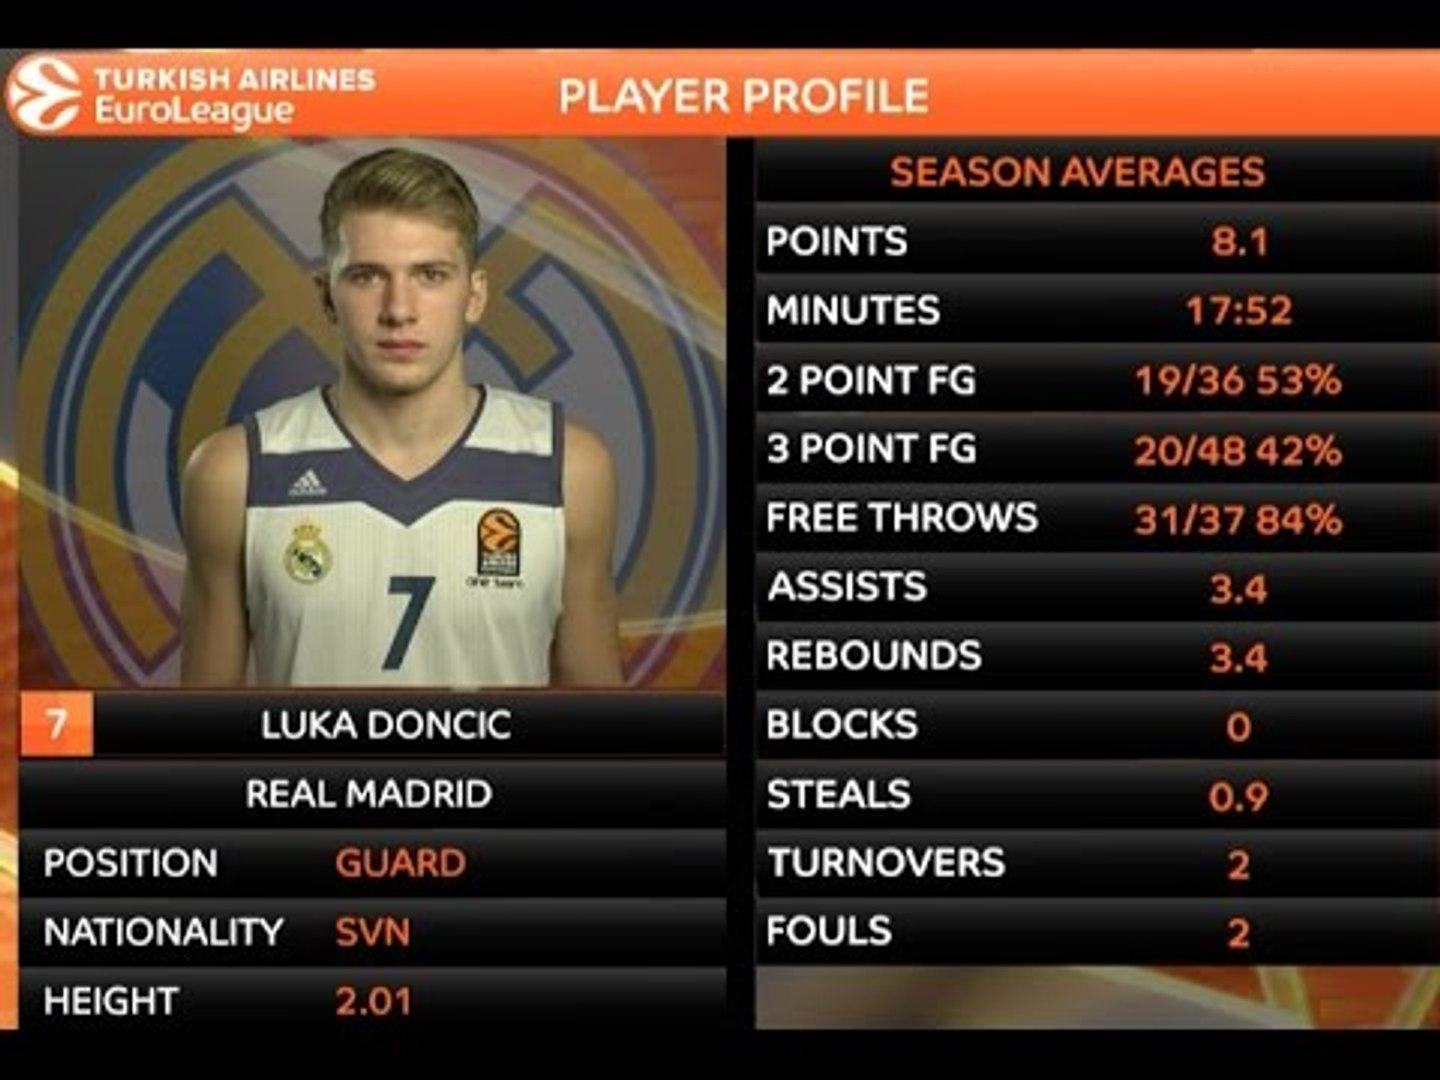 Real Madrid Luka Doncic Real Madrid jersey